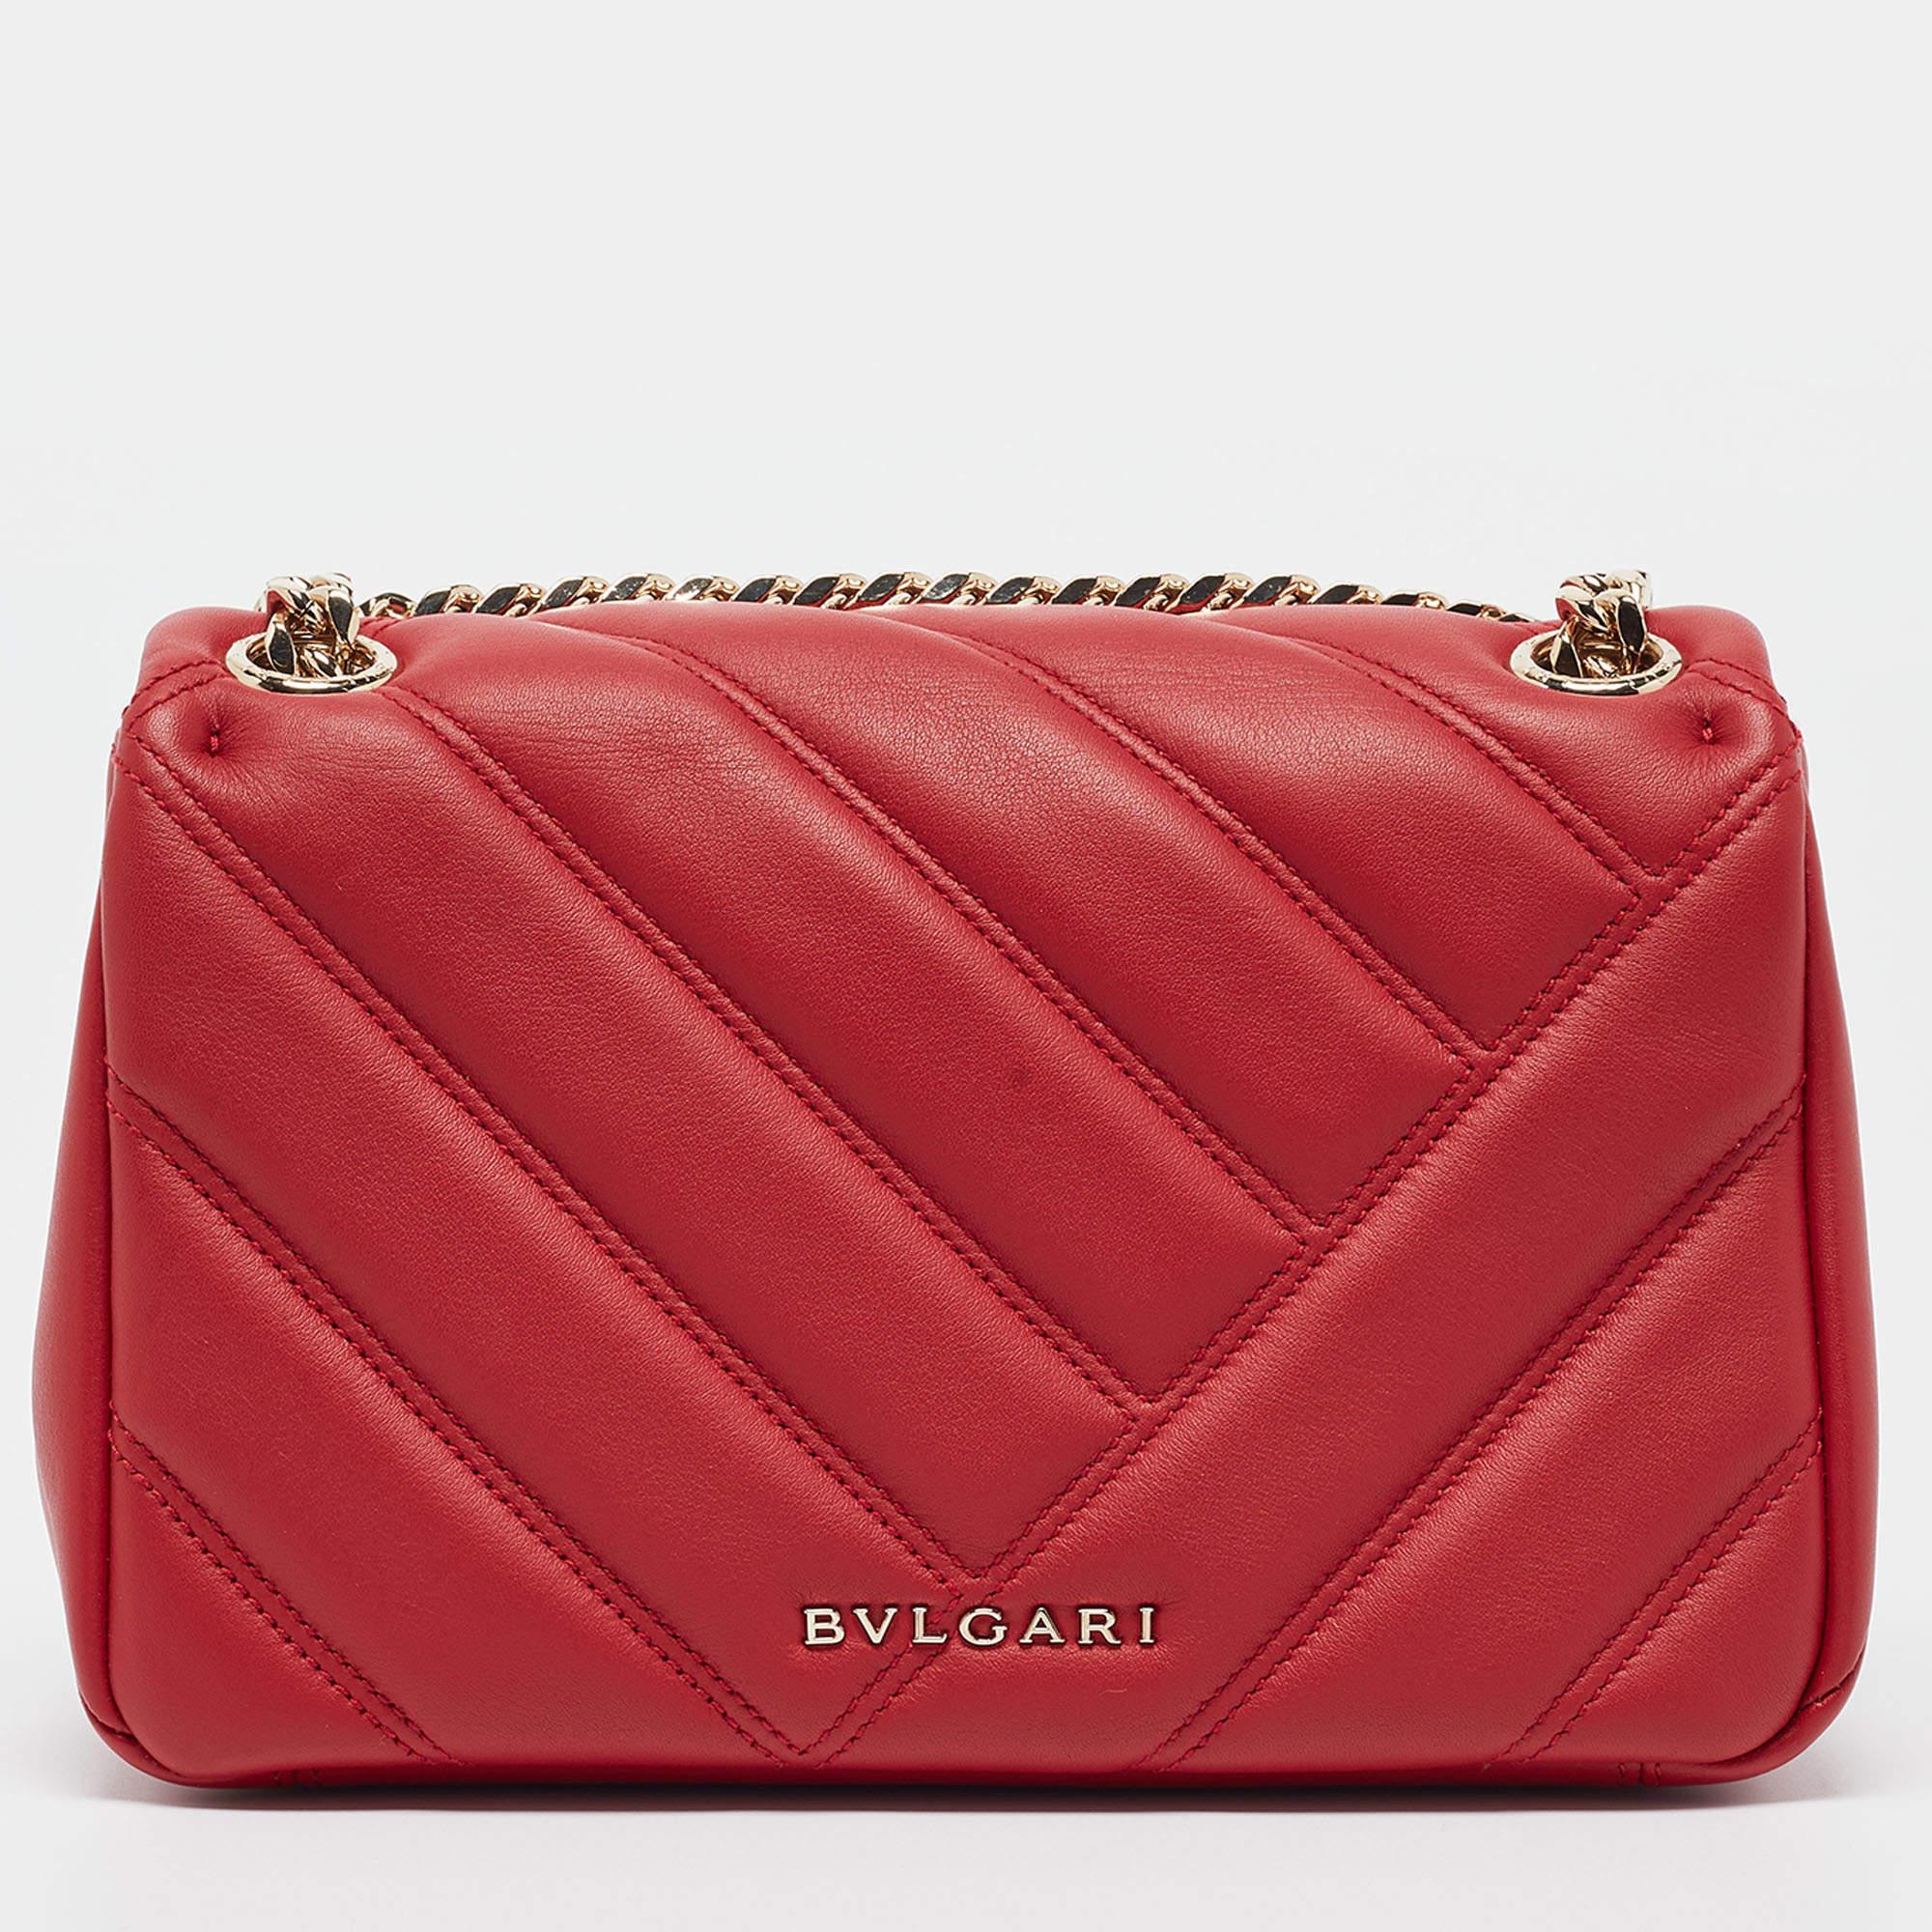 Bvlgari Red Quilted Leather Small Serpenti Cabochon Shoulder Bag 8